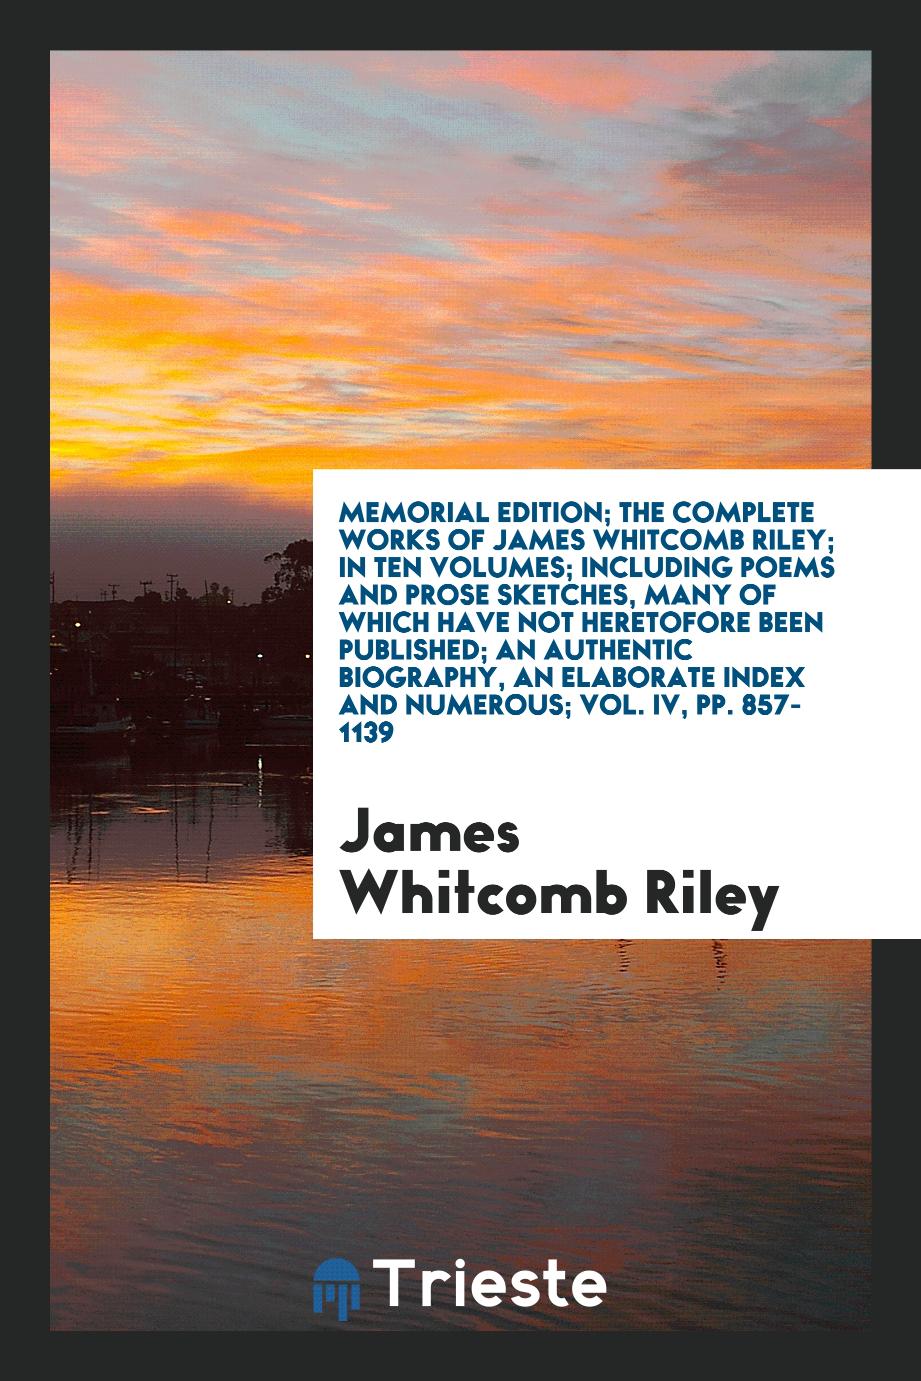 Memorial Edition; The Complete Works of James Whitcomb Riley; In Ten Volumes; Including Poems and Prose Sketches, Many of Which Have Not Heretofore Been Published; An Authentic Biography, an Elaborate Index and Numerous; Vol. IV, pp. 857-1139